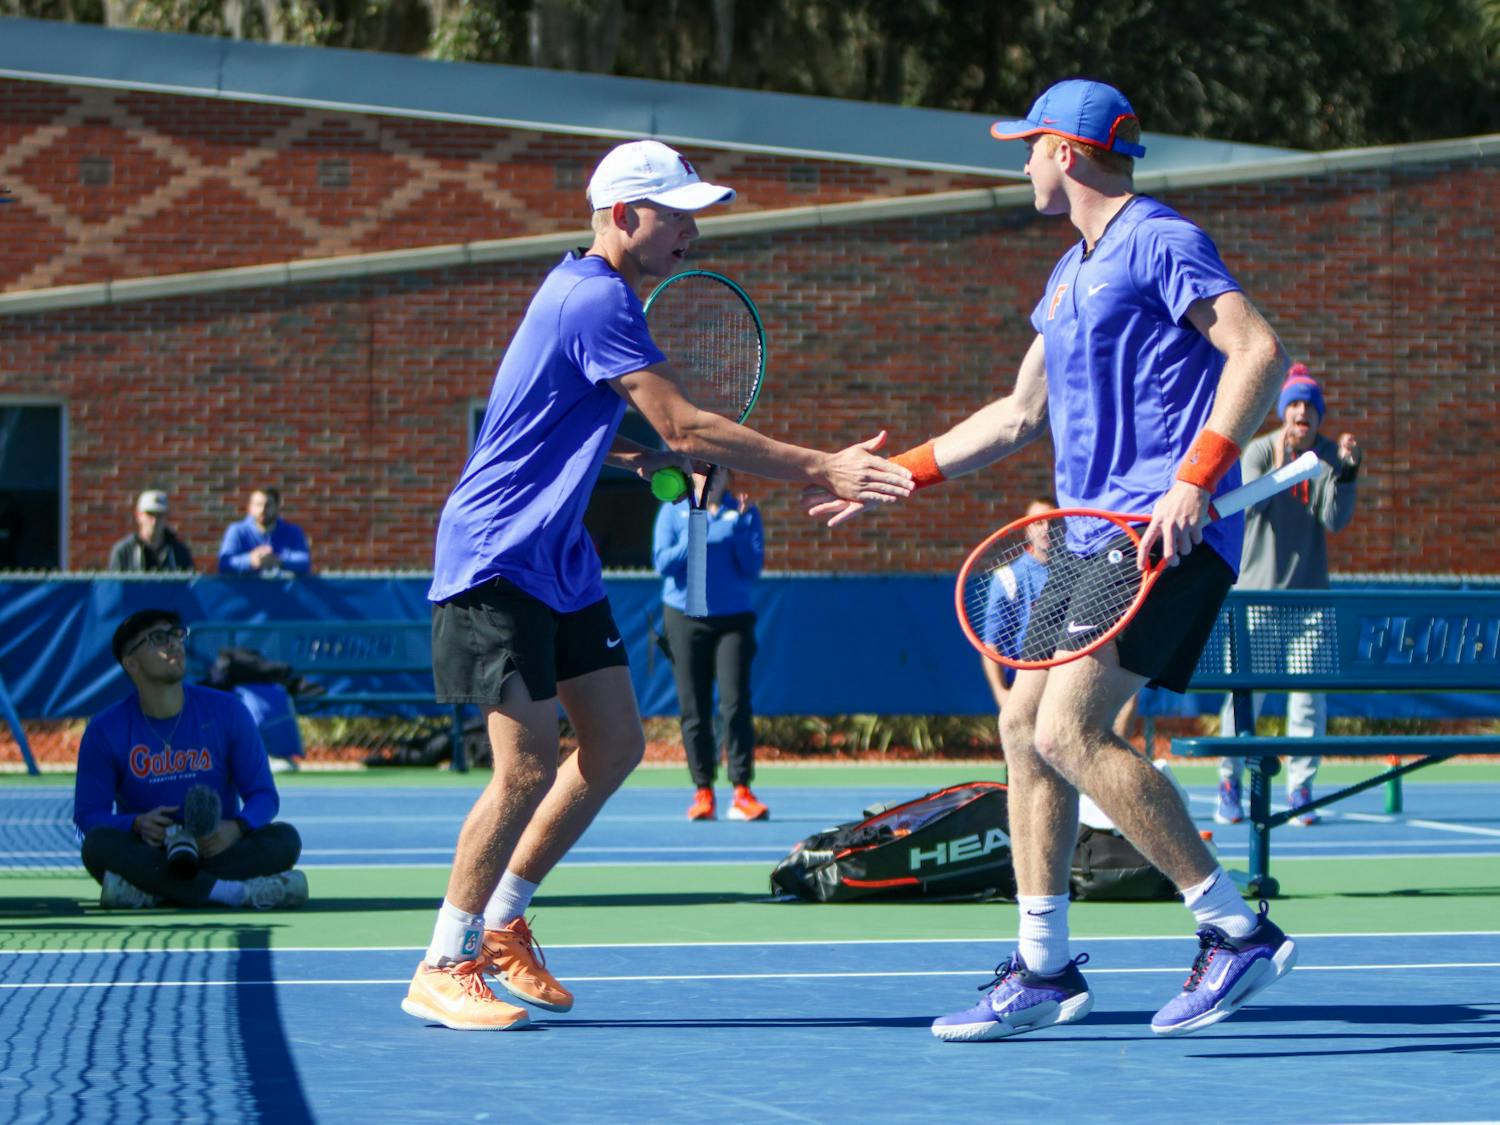 Florida senior Lukas Greif and freshman Jonah Braswell celebrate during their doubles match in the Gators' 5-2 loss to the No. 8 Texas Longhorns Sunday, Jan. 15, 2023.